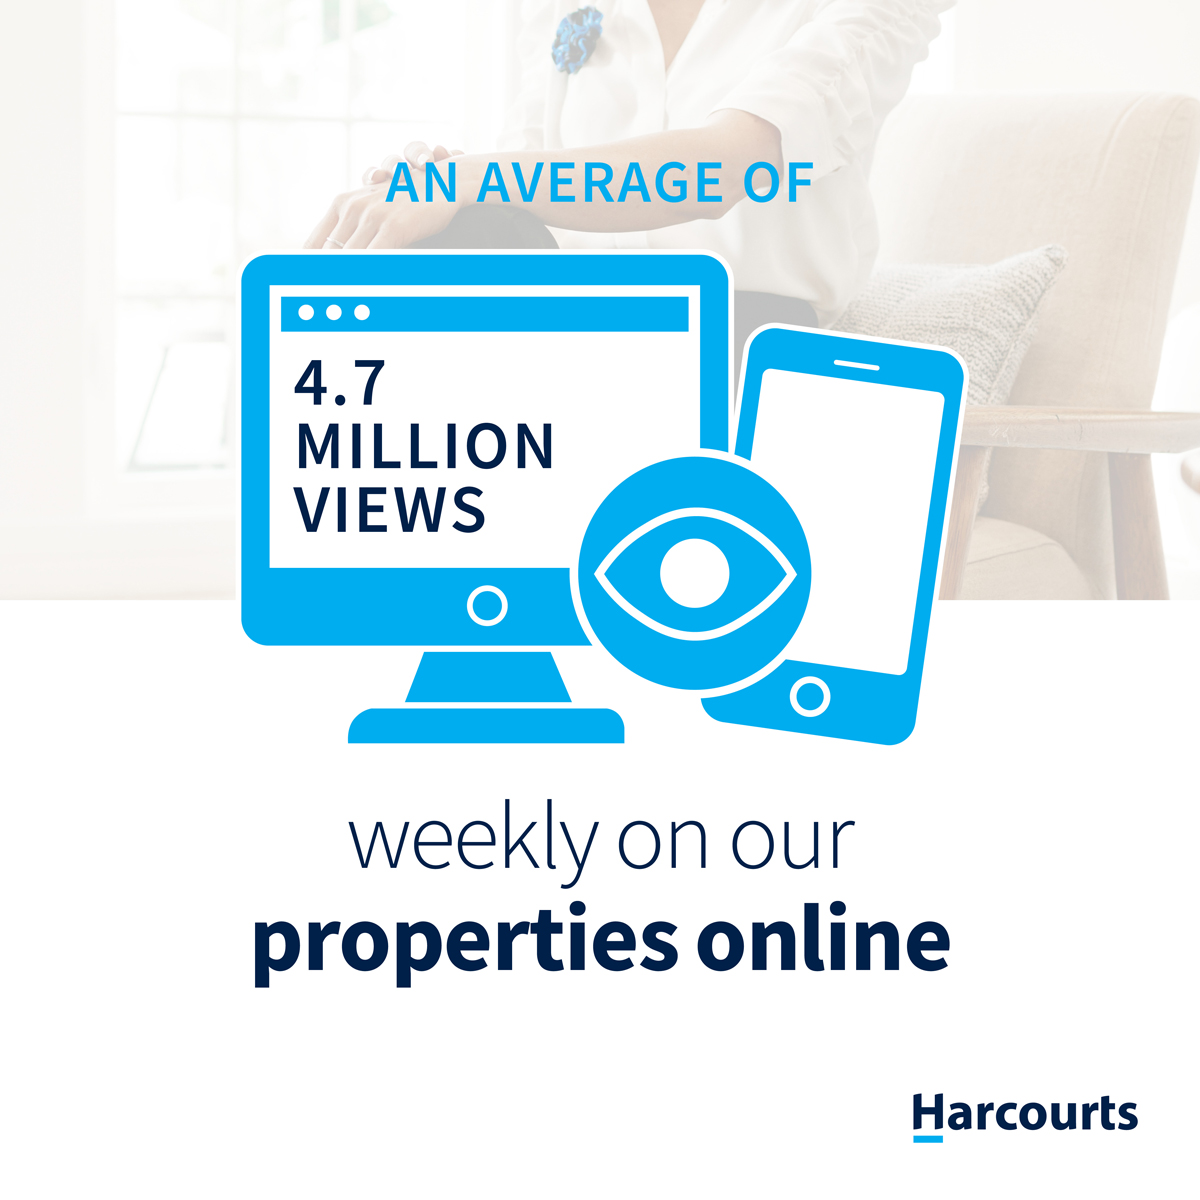 Average of 4.7 Million views weekly on our properties online.